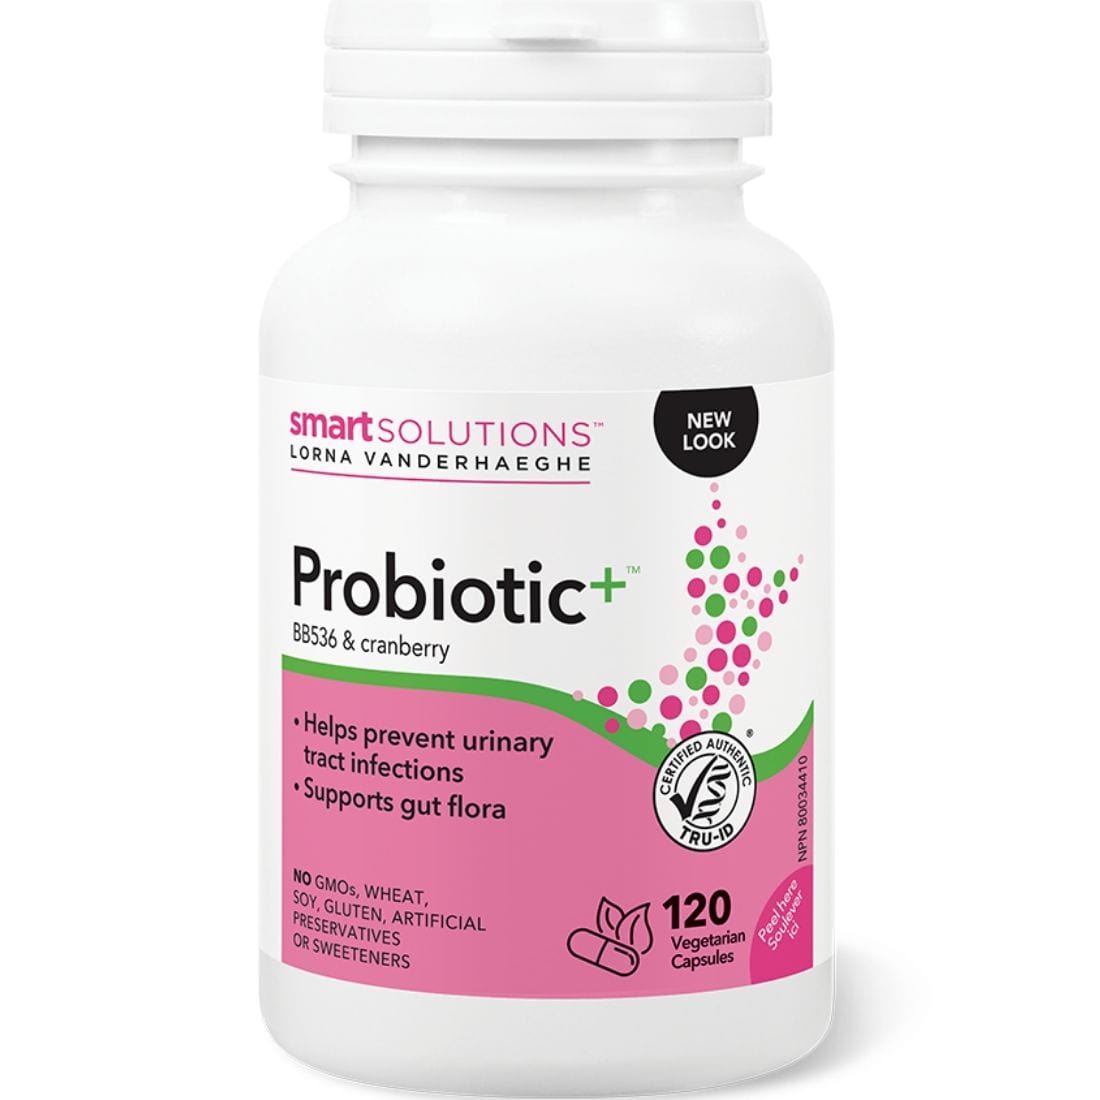 Smart Solutions Probiotic Plus, Helps prevent urinary tract infections, 120 Vegetarian Capsules (Formerly Lorna Vanderhaeghe)